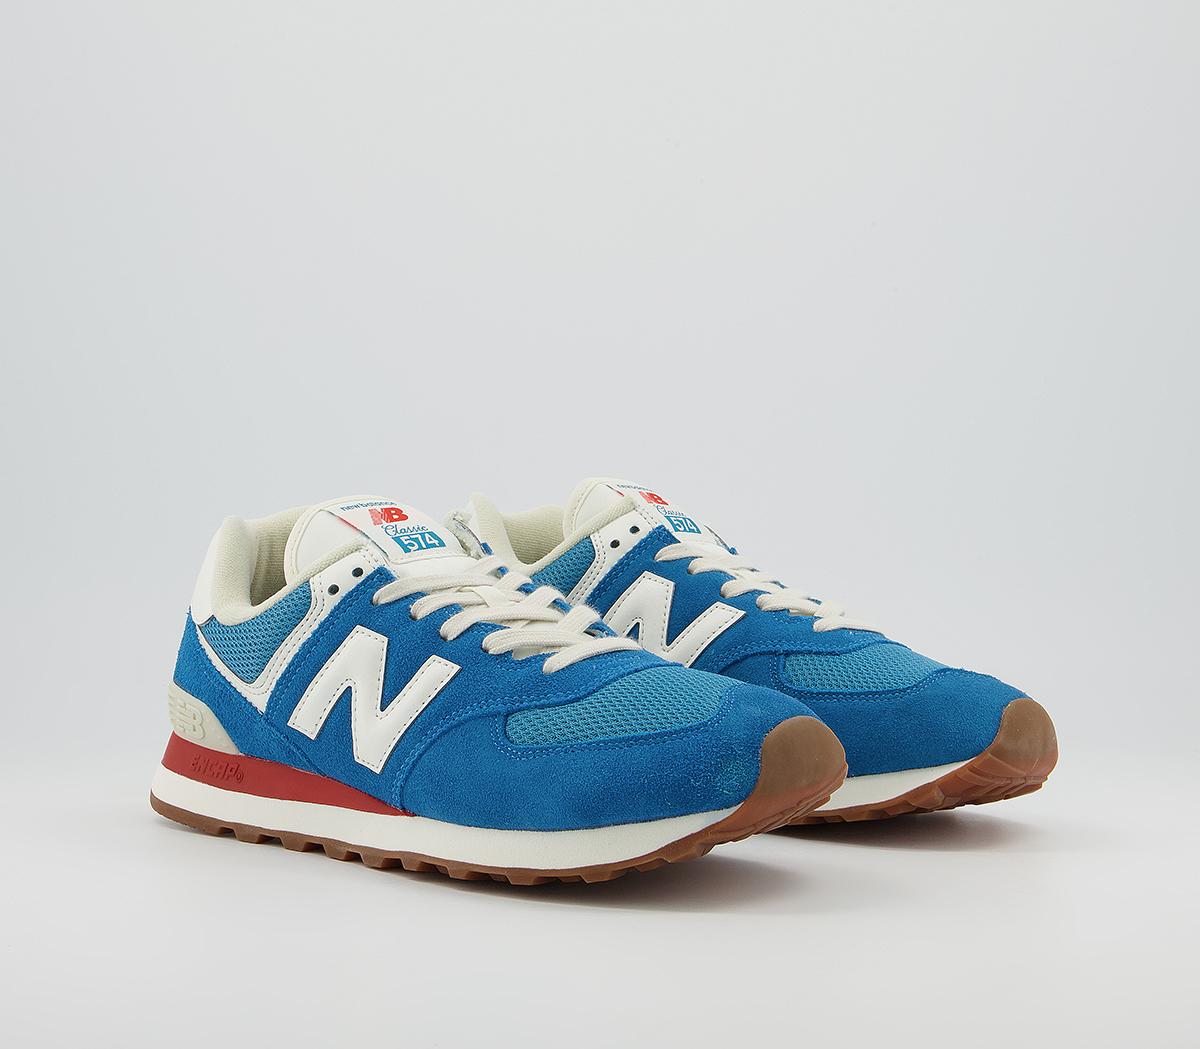 New Balance 574 Trainers Blue White Red - His trainers